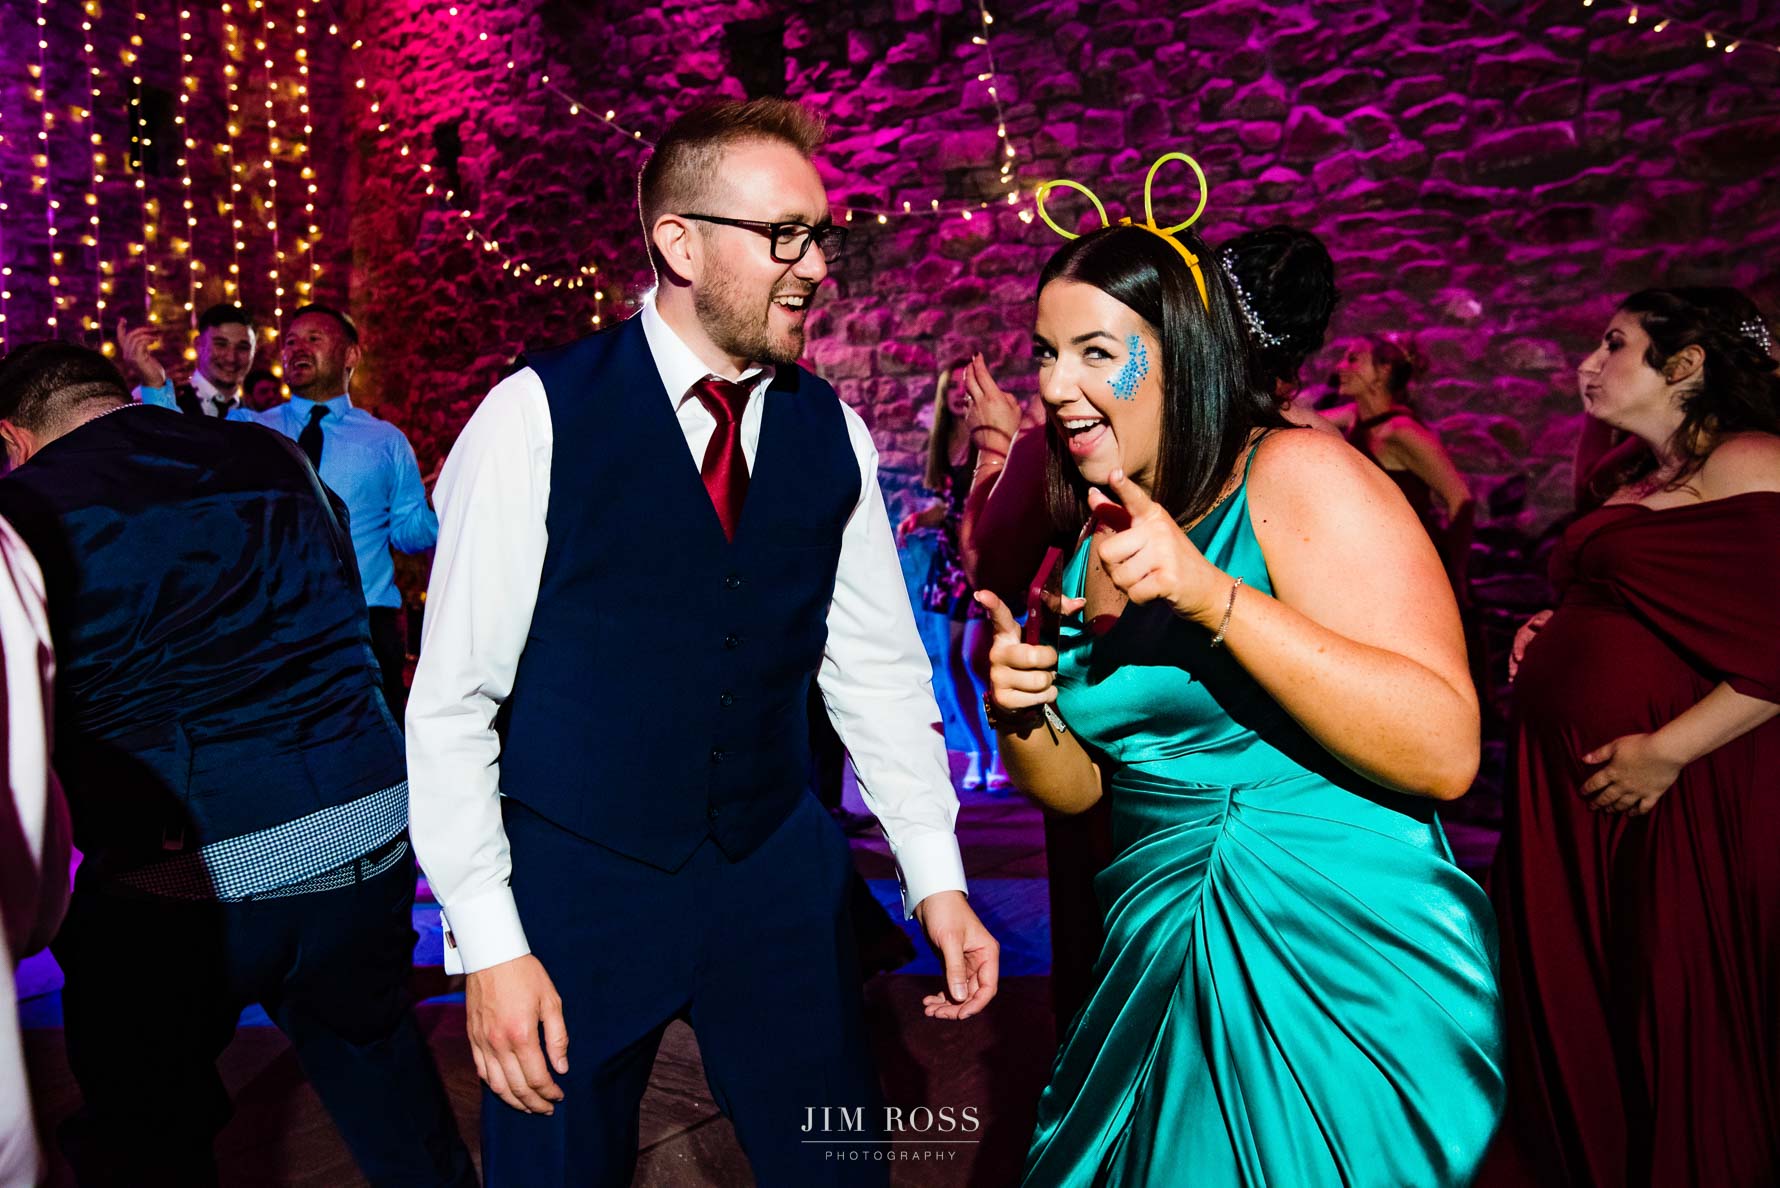 cheeky finger guns from wedding guests